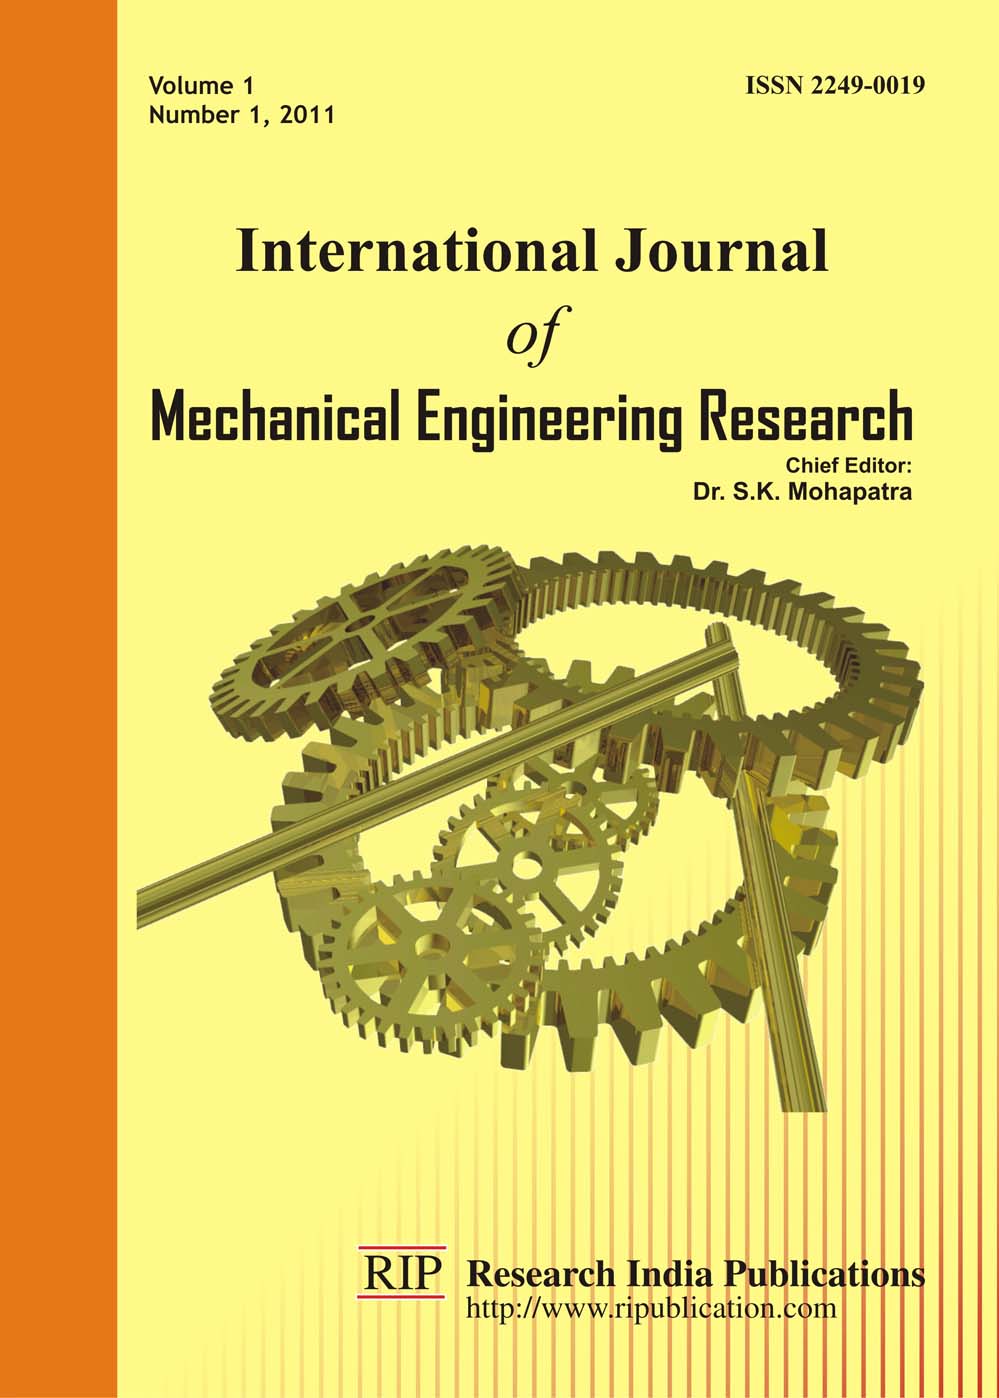 Mechanical engineering research papers